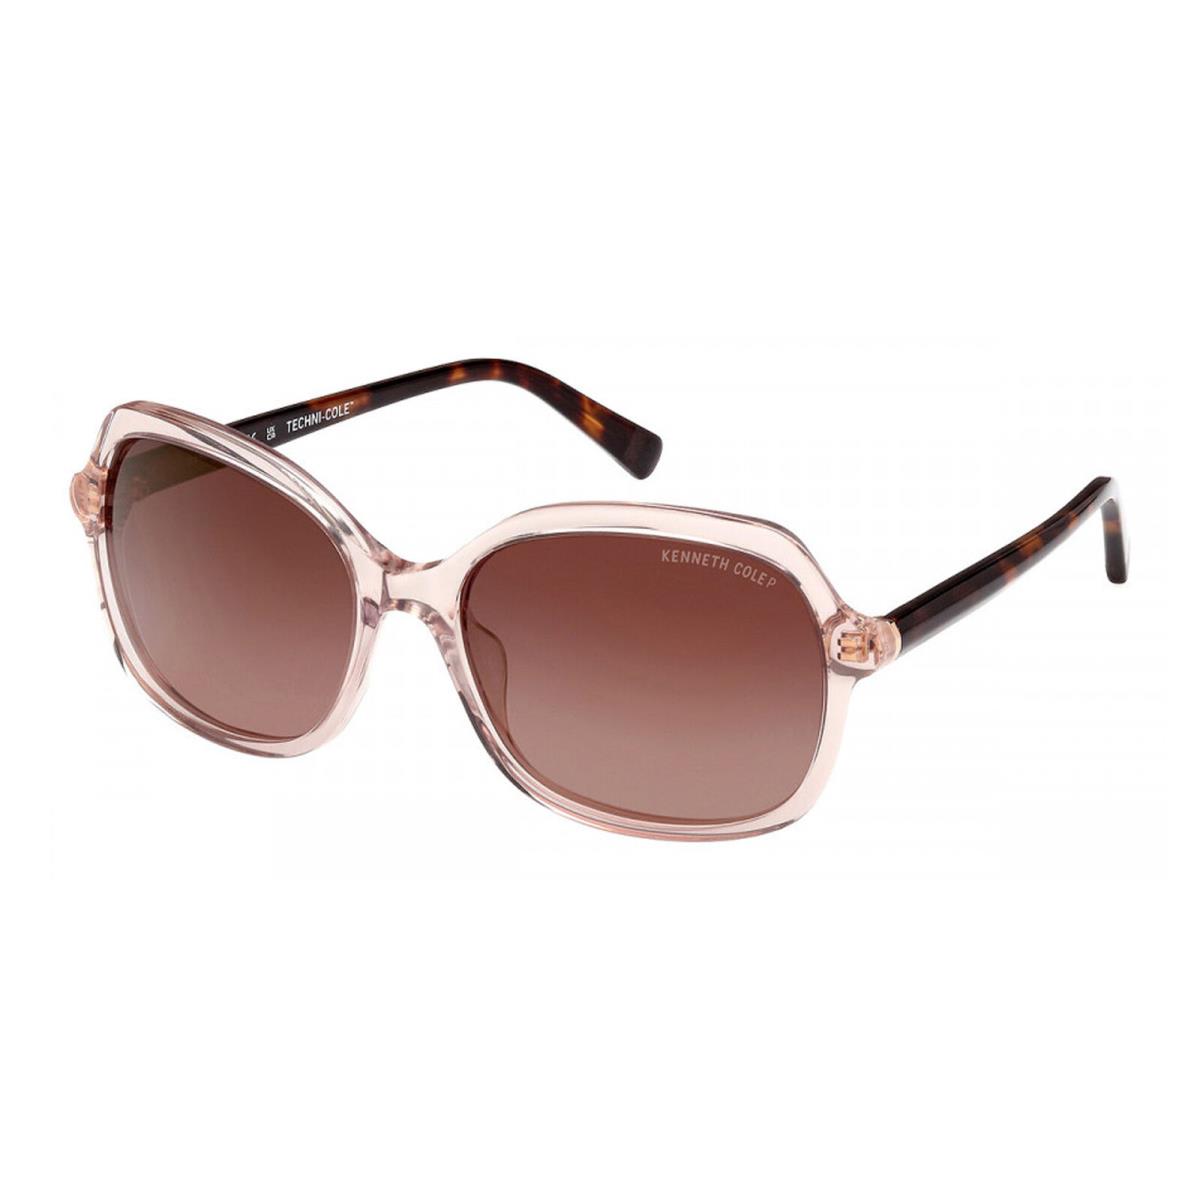 Kenneth Cole NY Polarized Women`s Biodegradable Butterfly Sunglasses - KC7256 Shiny Pink/Brown Polarized (72H-58)